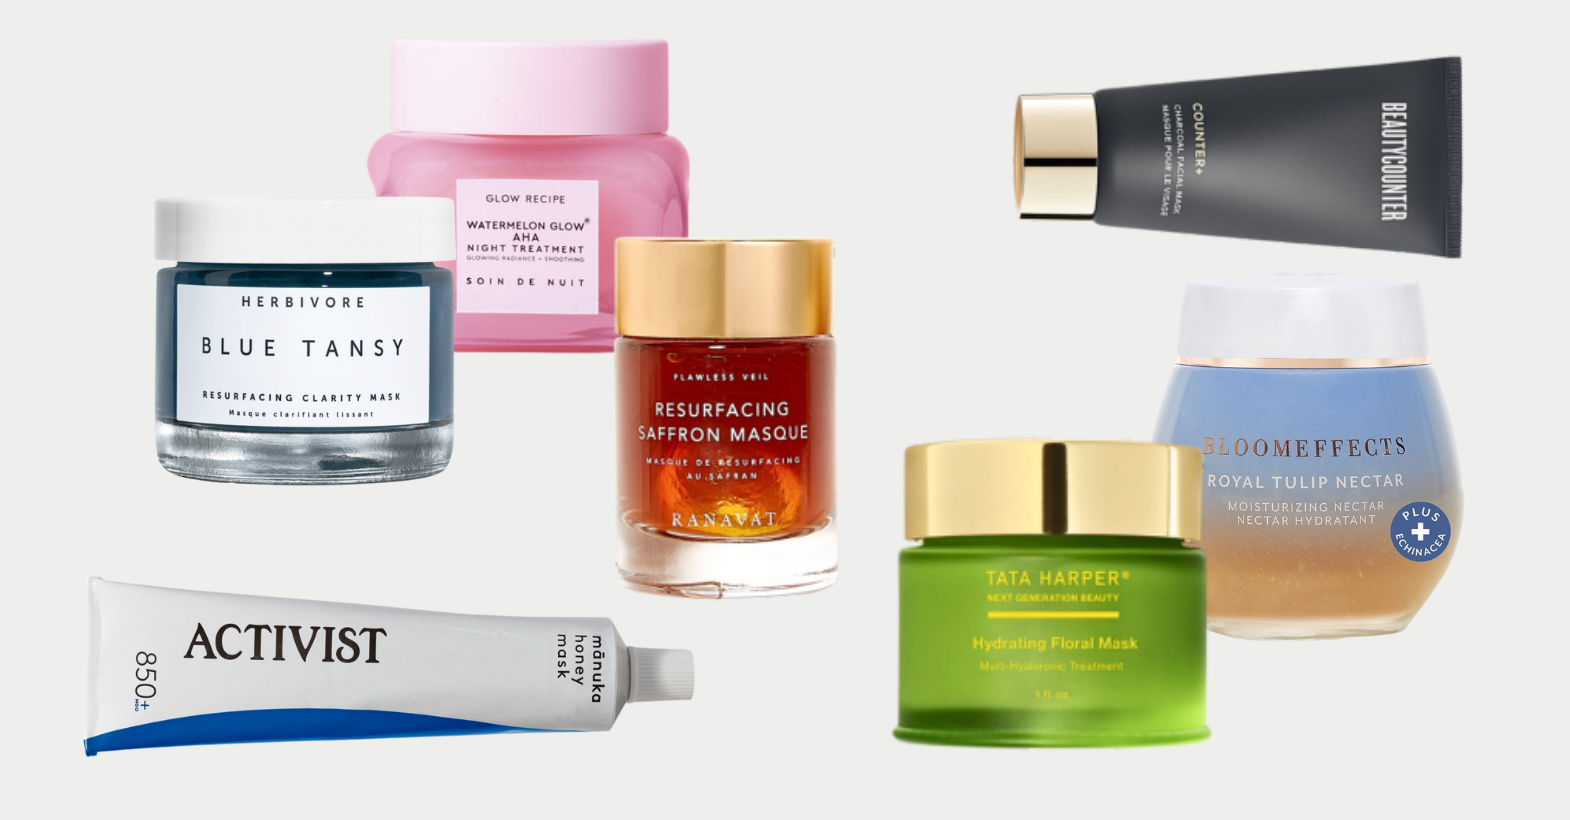 Face Masks for hydration, detox, wrinkles, and more.